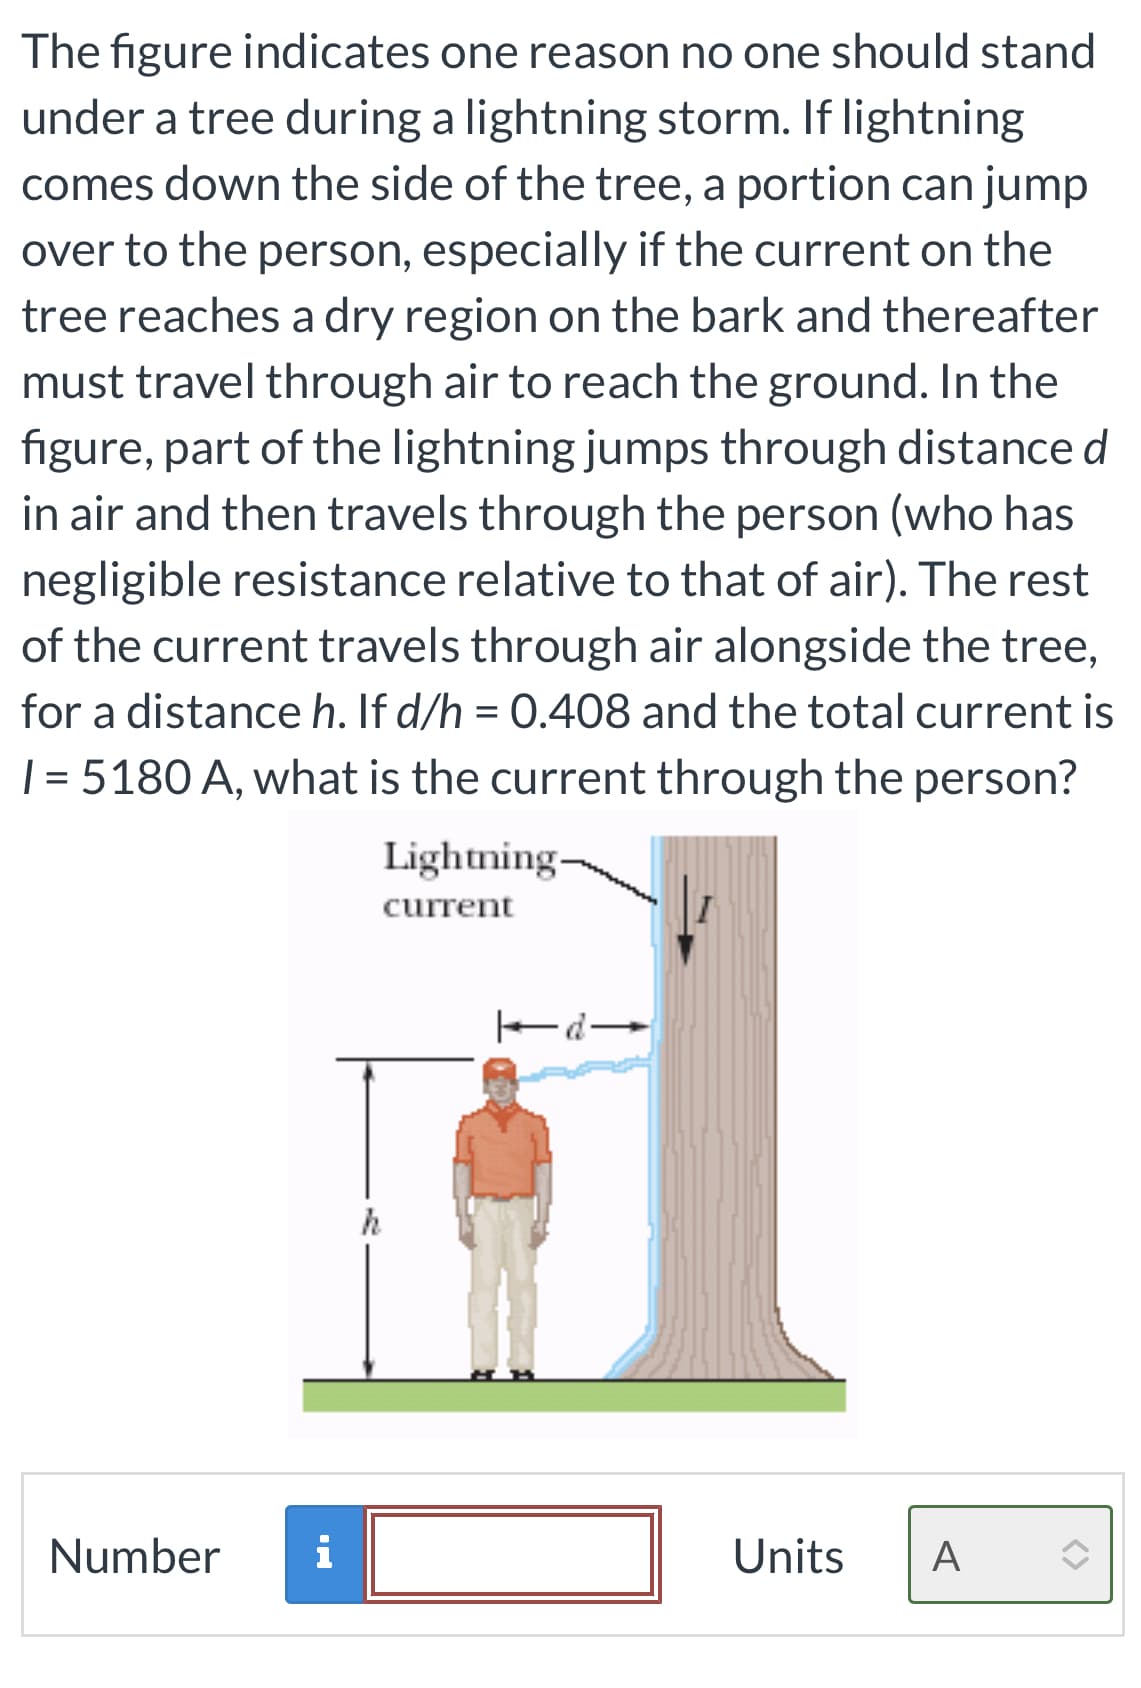 The figure indicates one reason no one should stand
under a tree during a lightning storm. If lightning
comes down the side of the tree, a portion can jump
over to the person, especially if the current on the
tree reaches a dry region on the bark and thereafter
must travel through air to reach the ground. In the
figure, part of the lightning jumps through distance d
in air and then travels through the person (who has
negligible resistance relative to that of air). The rest
of the current travels through air alongside the tree,
for a distance h. If d/h = 0.408 and the total current is
| = 5180 A, what is the current through the person?
Number i
Lightning-
current
h
d
Units A
<>